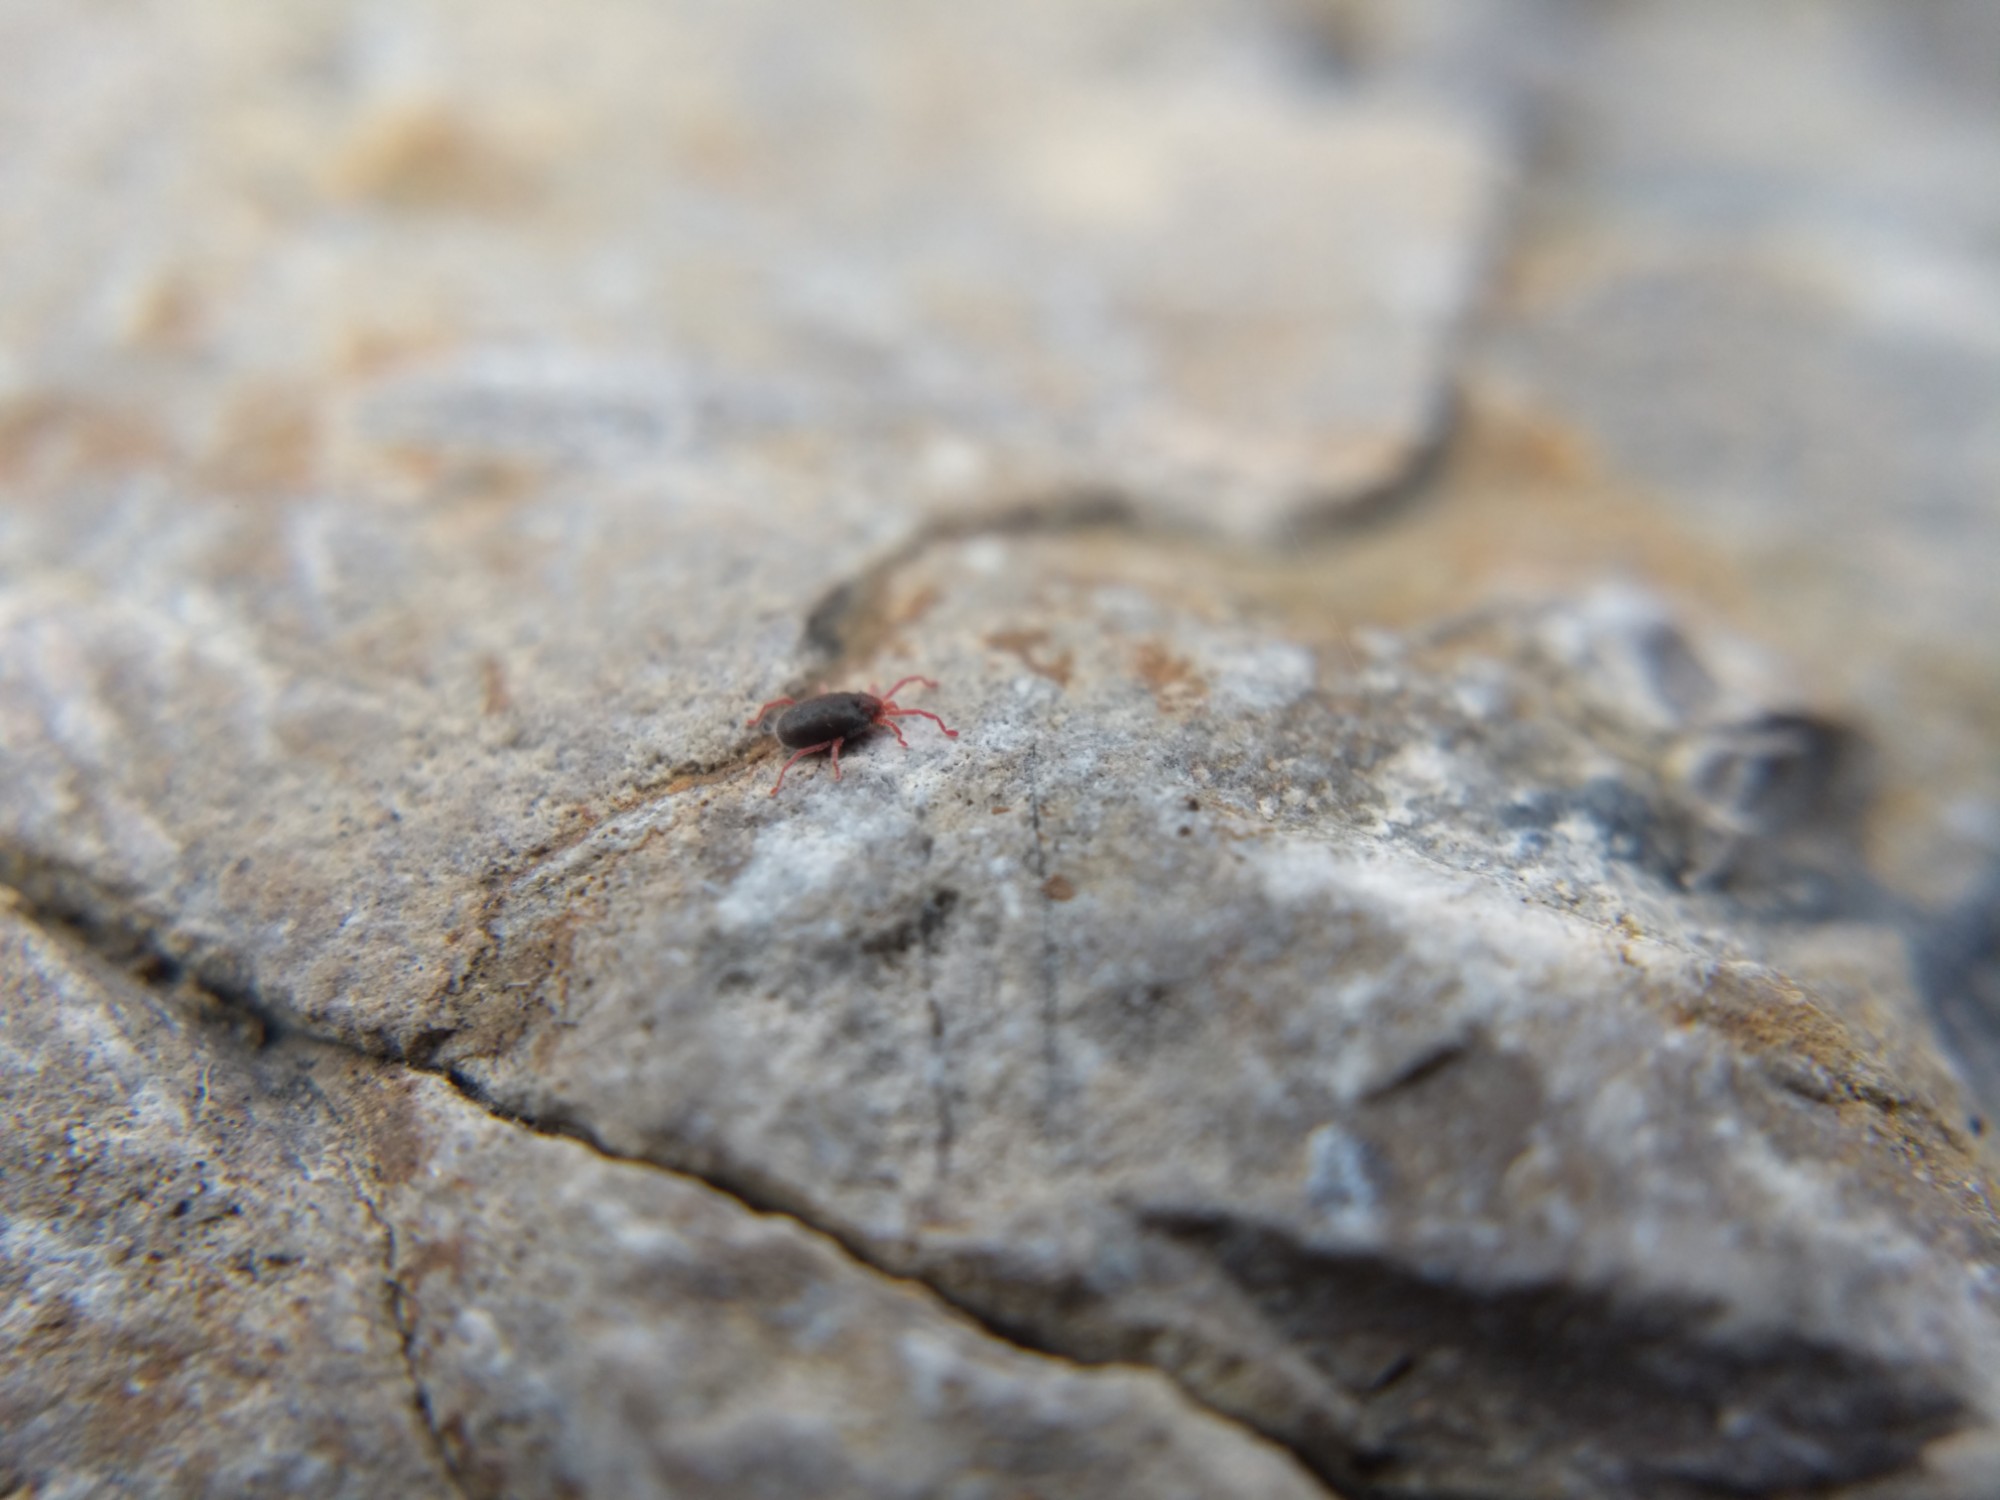 A long-legged velvet mite, with a plump blueish body and long skinny red legs, walking on a rock surface.